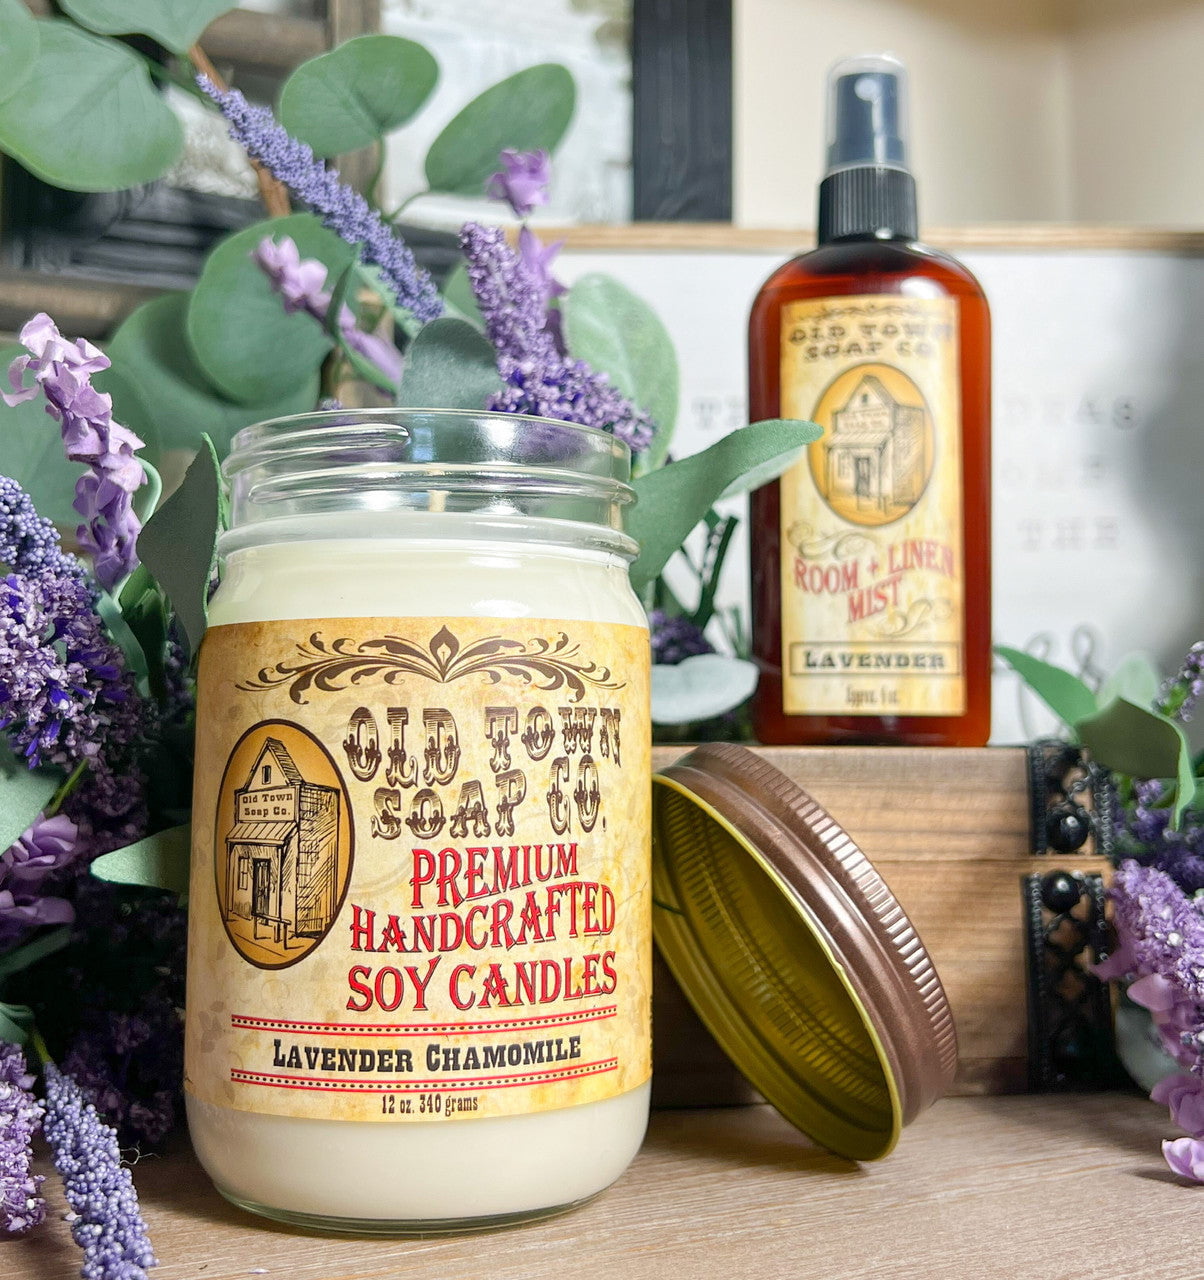 Honey Bunny - 12oz. Candles - Old Town Soap Co.